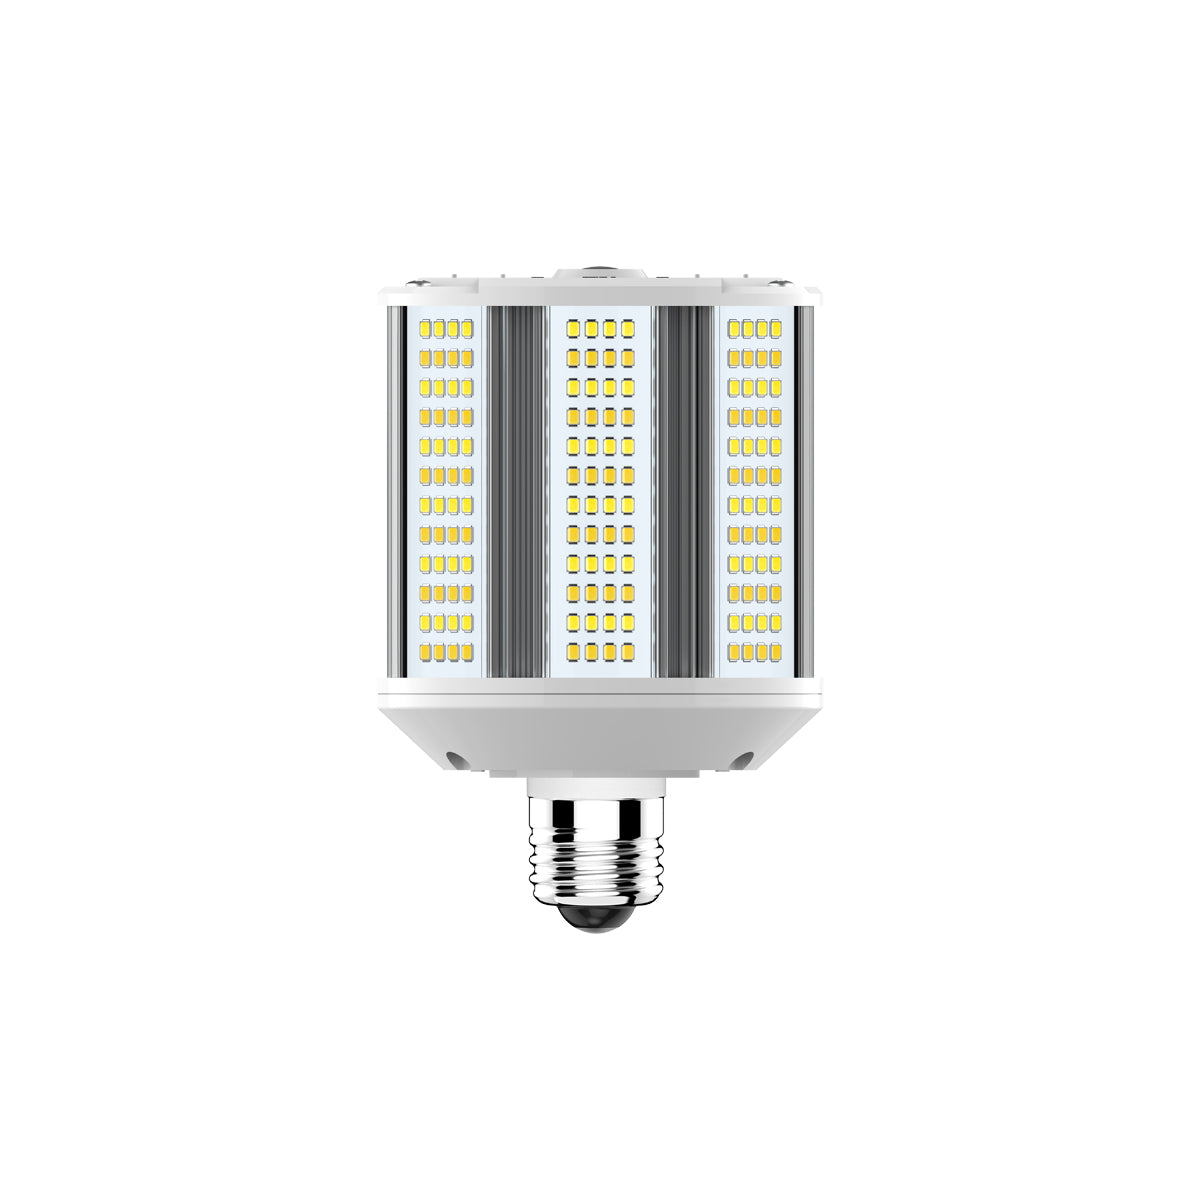 EIKO 12728 LPS20WP/8FCCT/E26 LED HID Replacement Wallpack Lamp 20/10/5W 3000/1500/750LM 80CRI 30/40/50K 120-277V E26